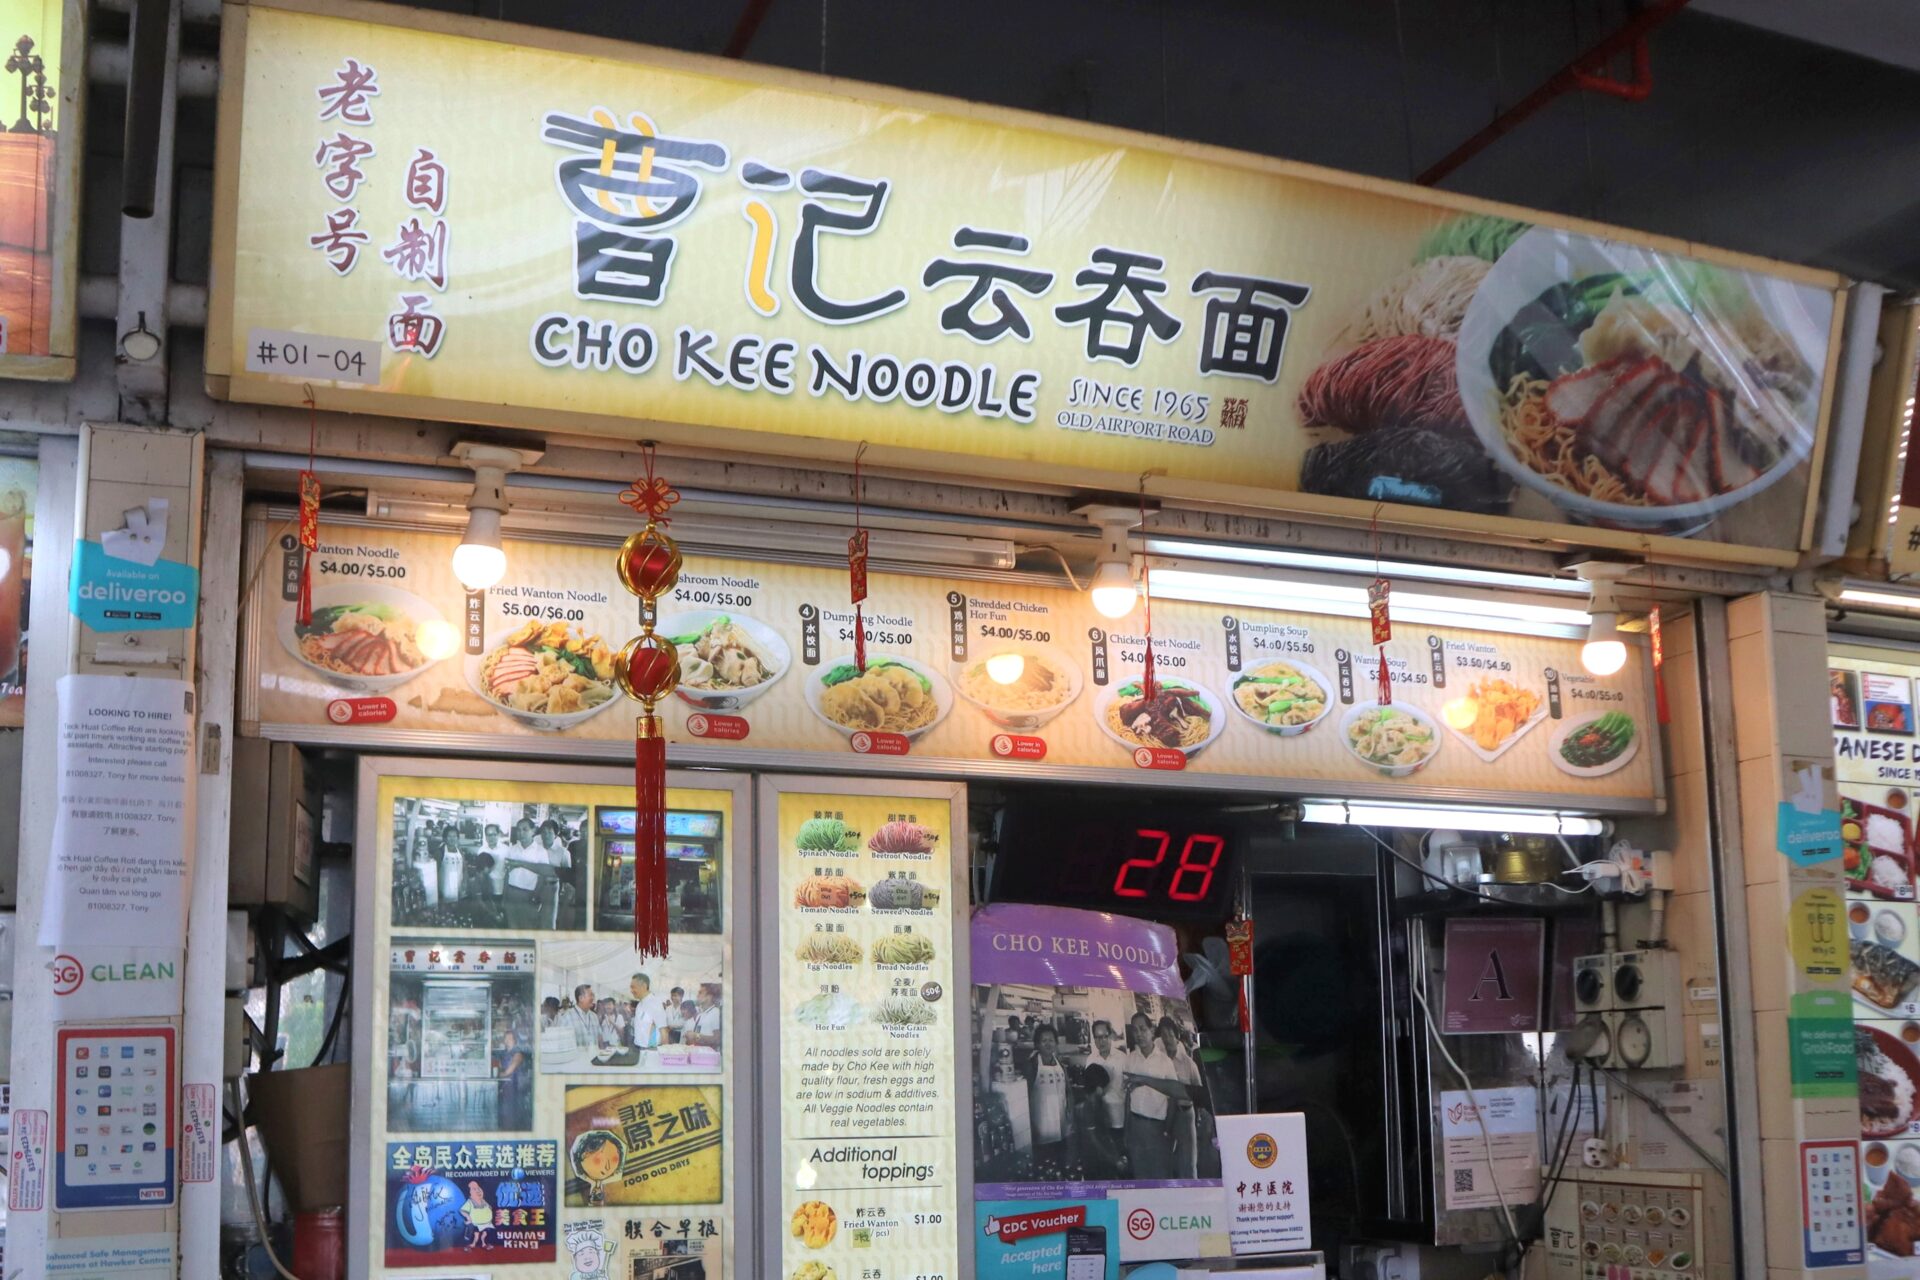 Old Airport Road Food Centre - cho kee noodle